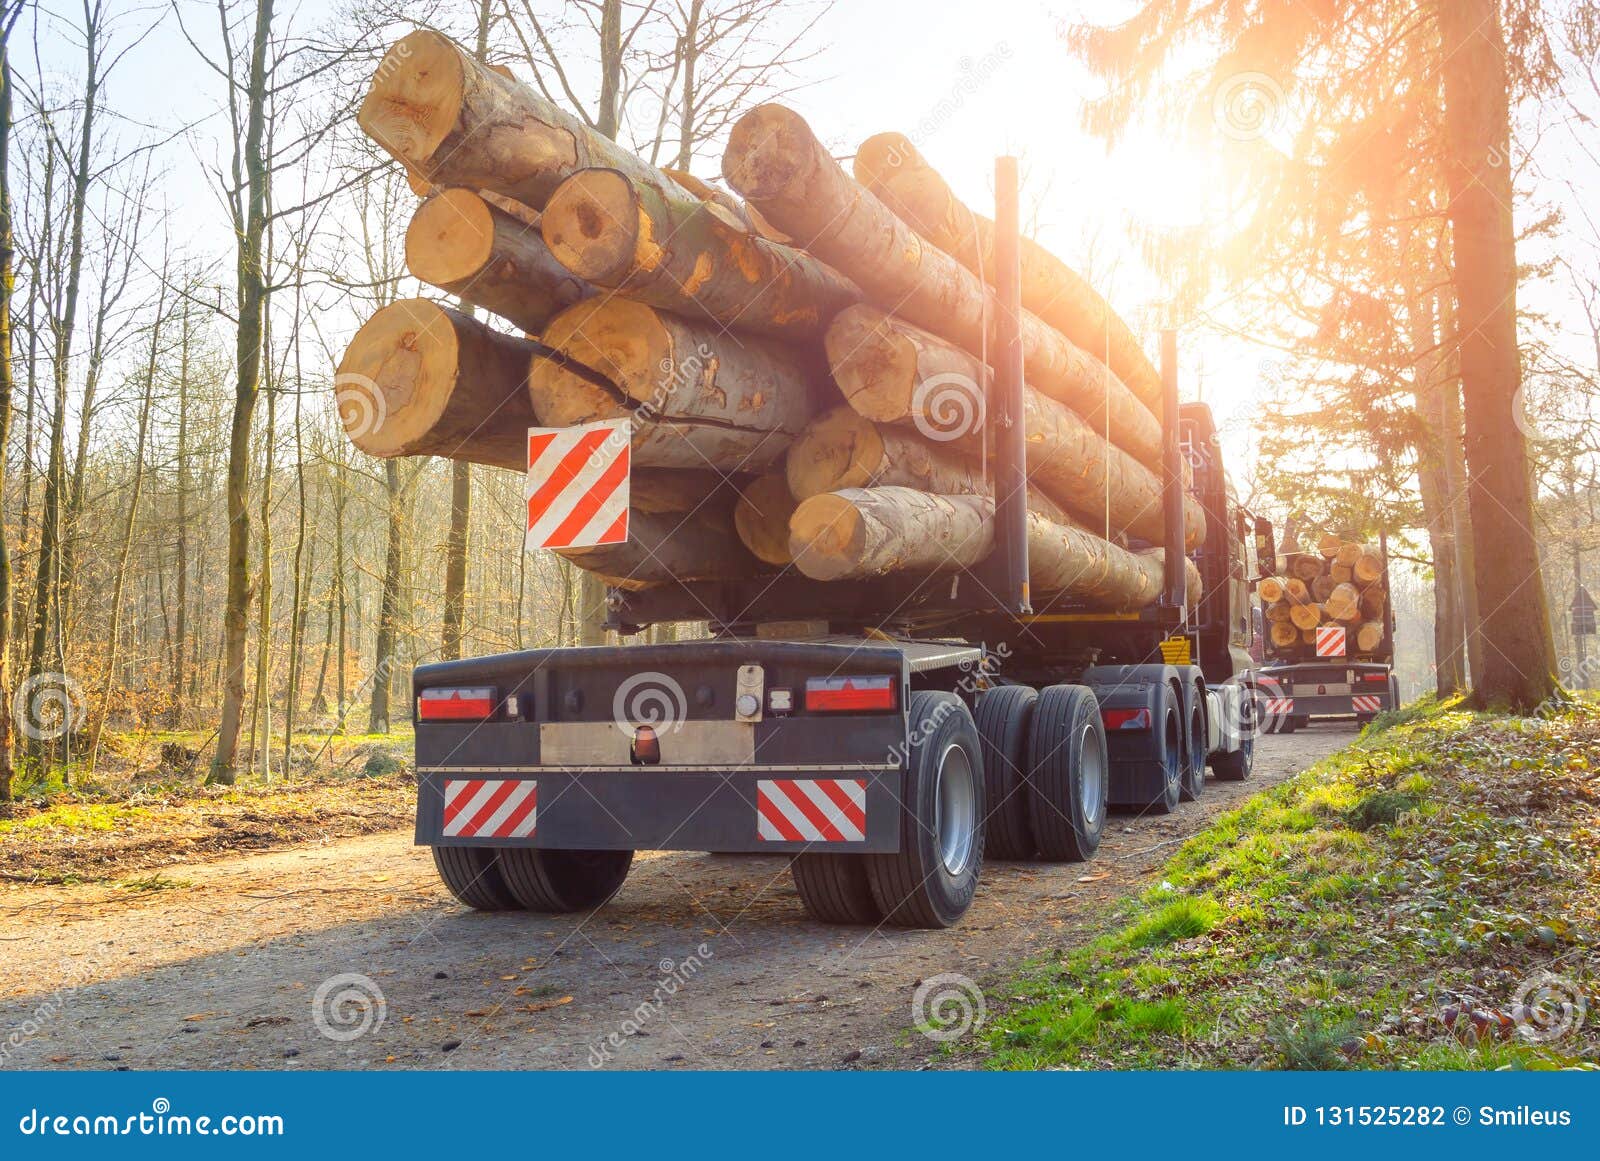 forestry activity: transport of tree trunks